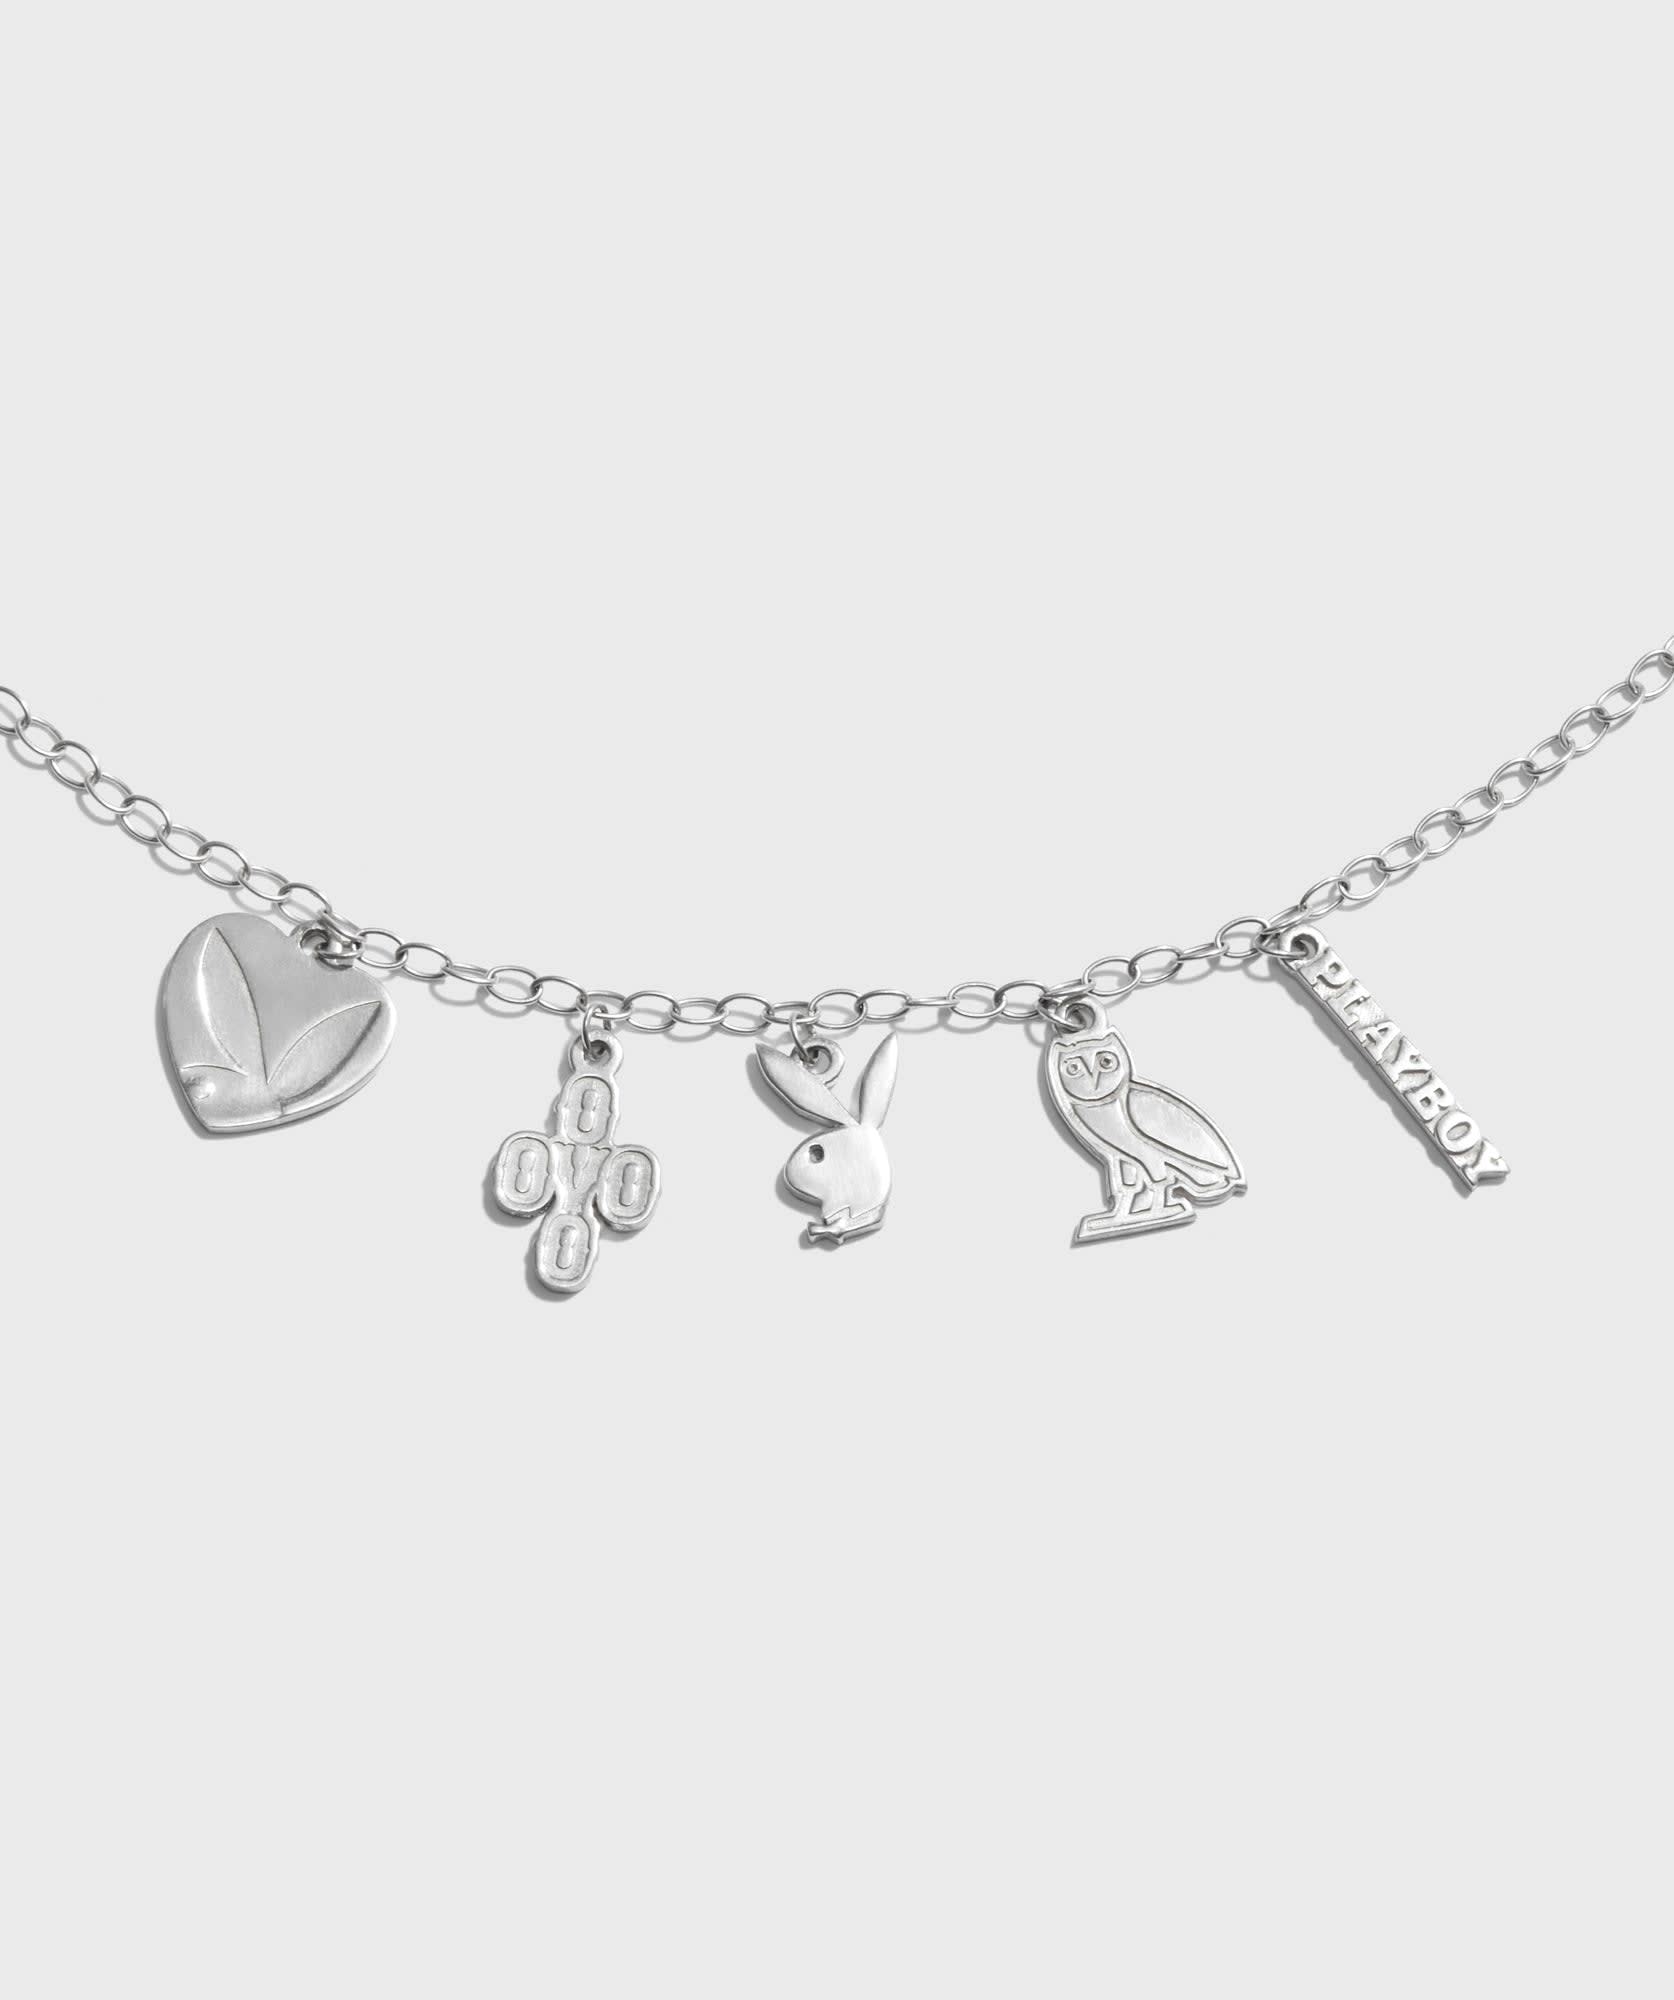 OVO® / PLAYBOY SILVER CHARM NECKLACE - SILVER